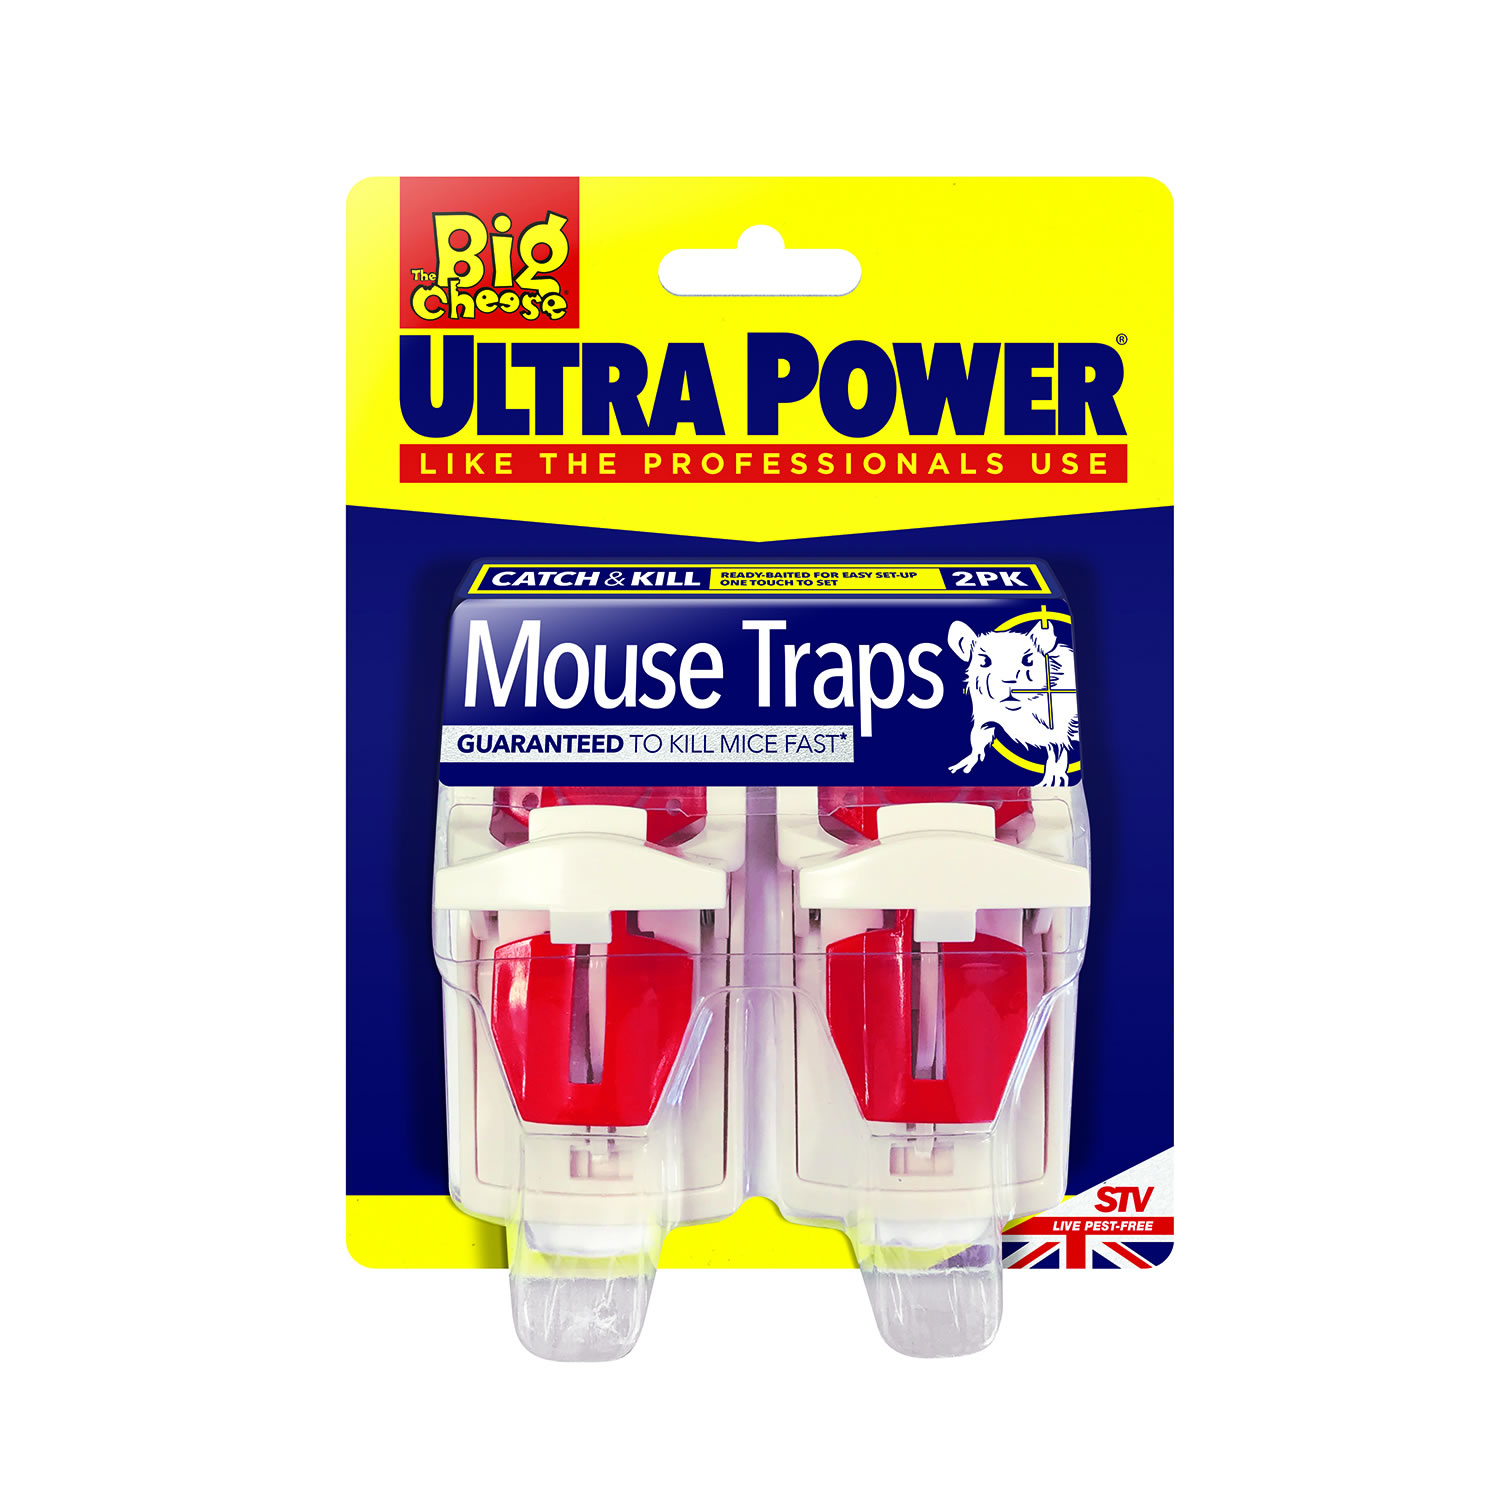 THE BIG CHEESE ULTRA POWER MOUSE TRAP TWIN PACK